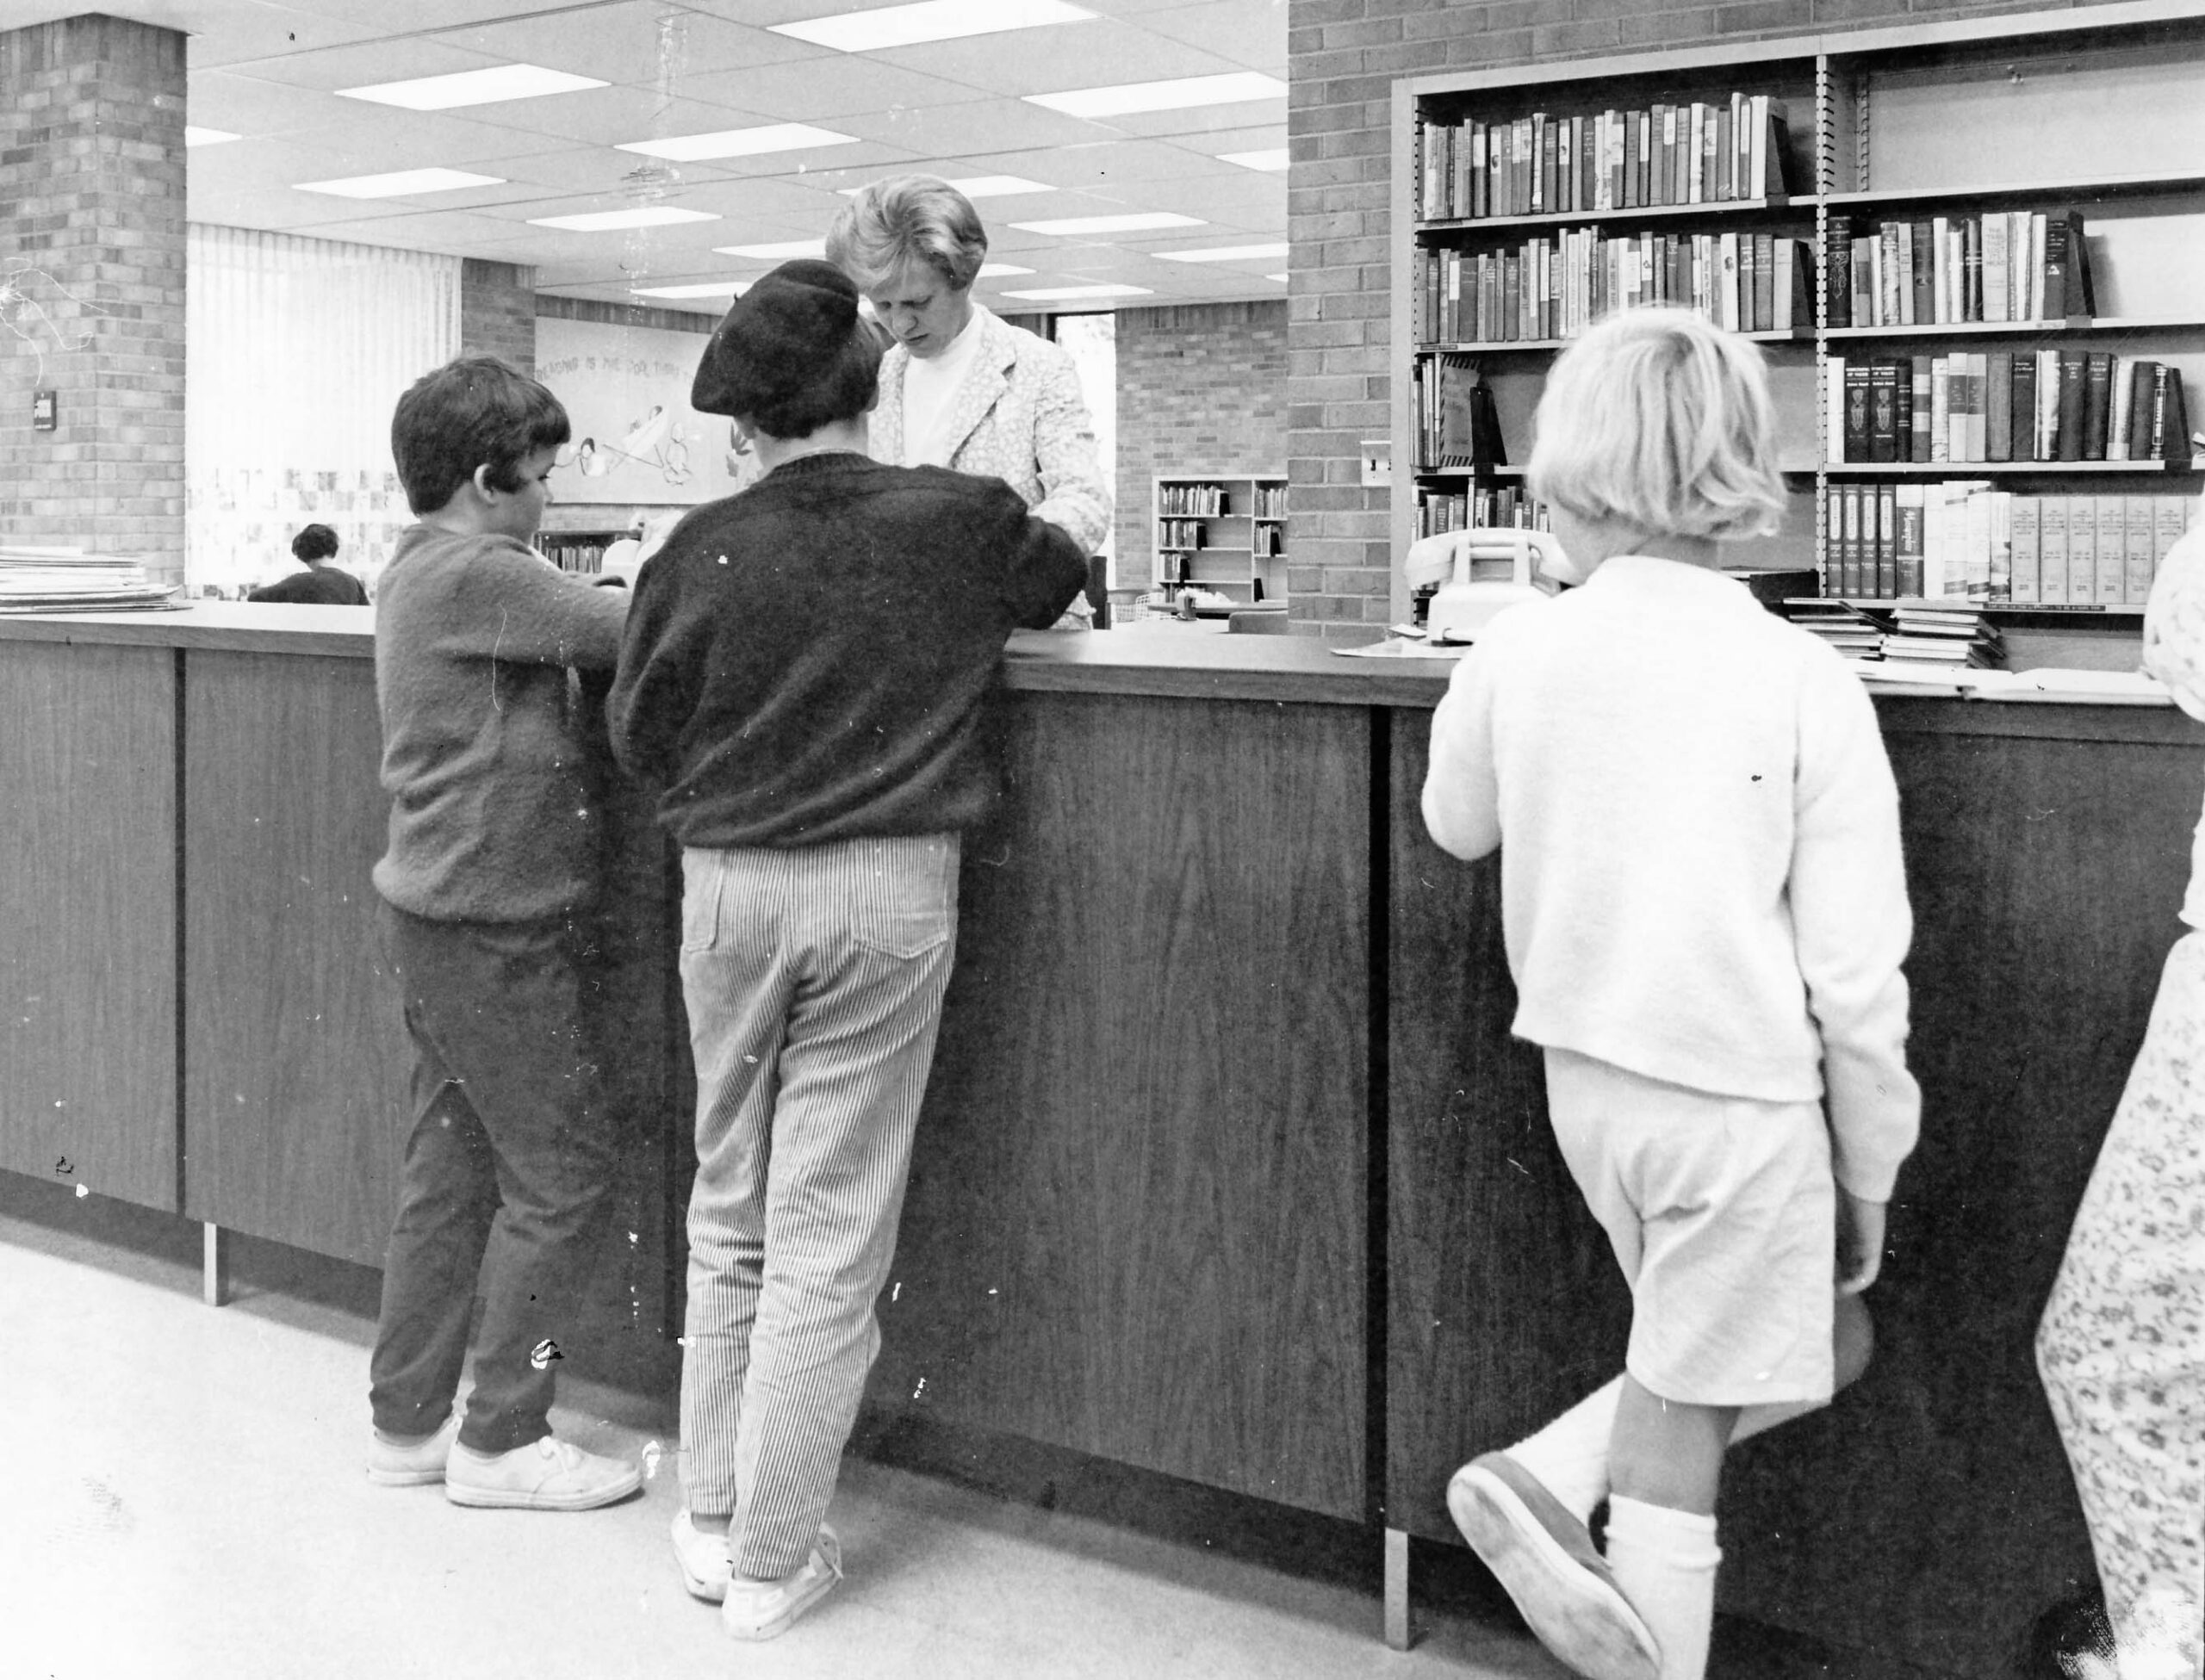 Black and White photograph of well-dressed children at a counter talking with a librarian at an old library